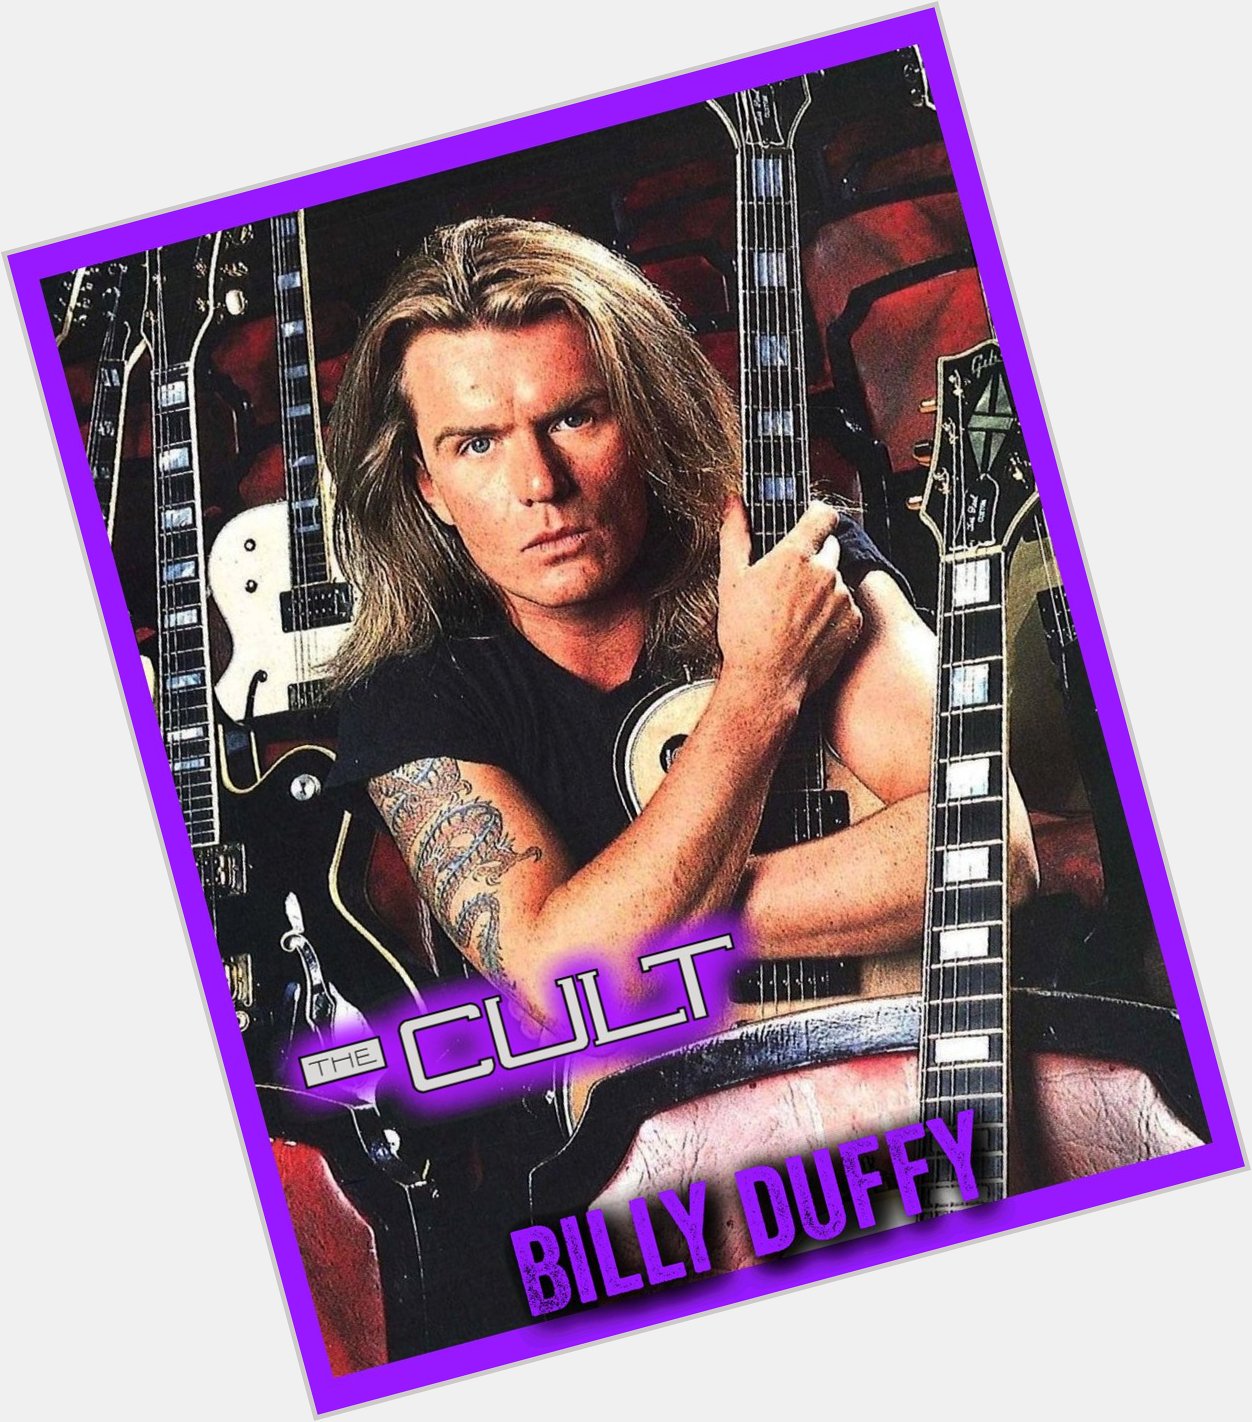 Happy Birthday Billy Duffy 
Guitarist The Cult 
May 12, 1961 Manchester, England 